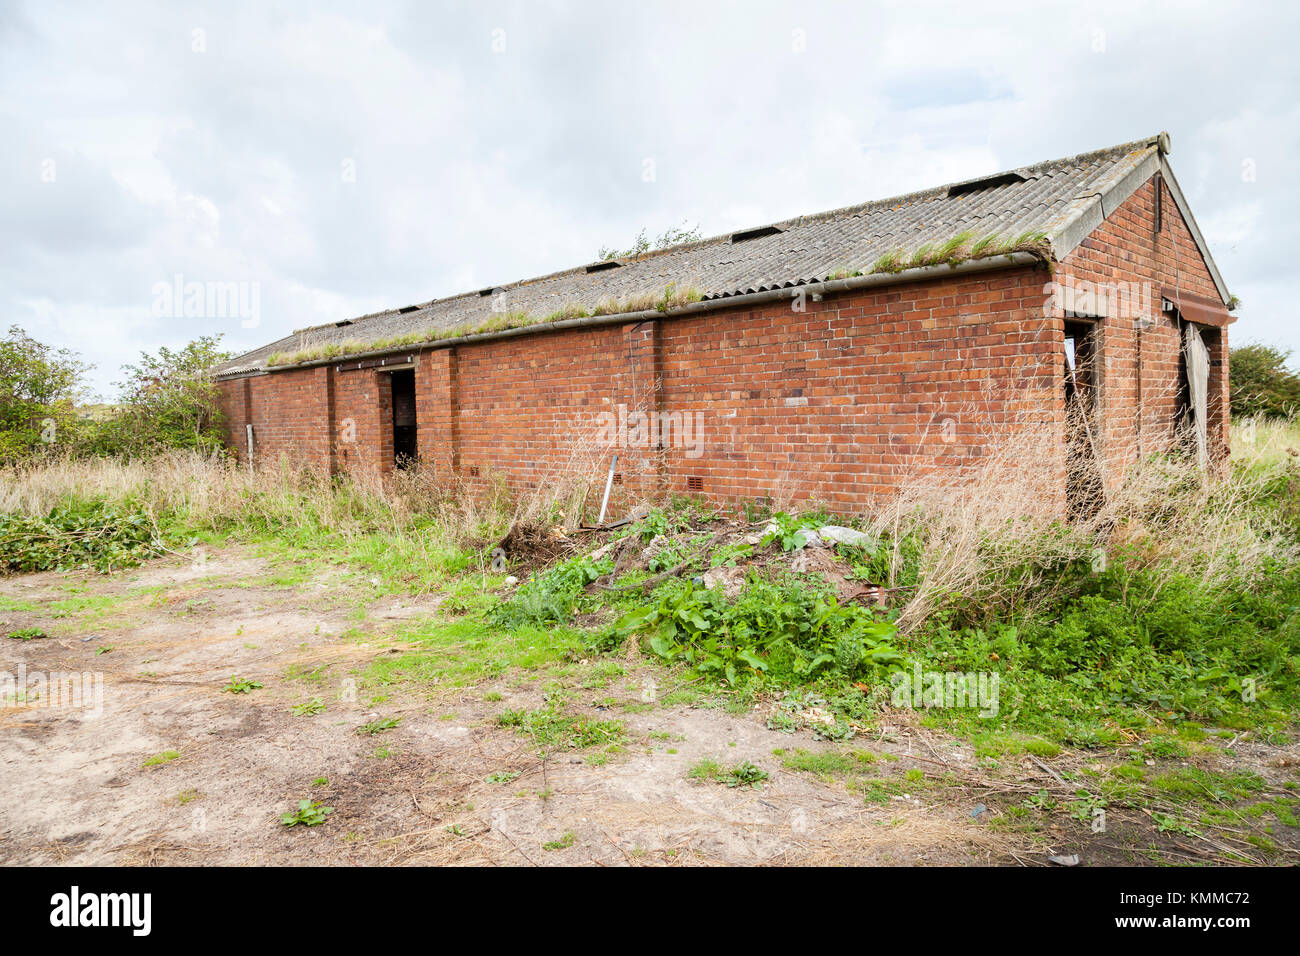 Derelict Farm Building, Abandoned agricultural red brick outbuilding with asbestos roof. In open field. Stock Photo